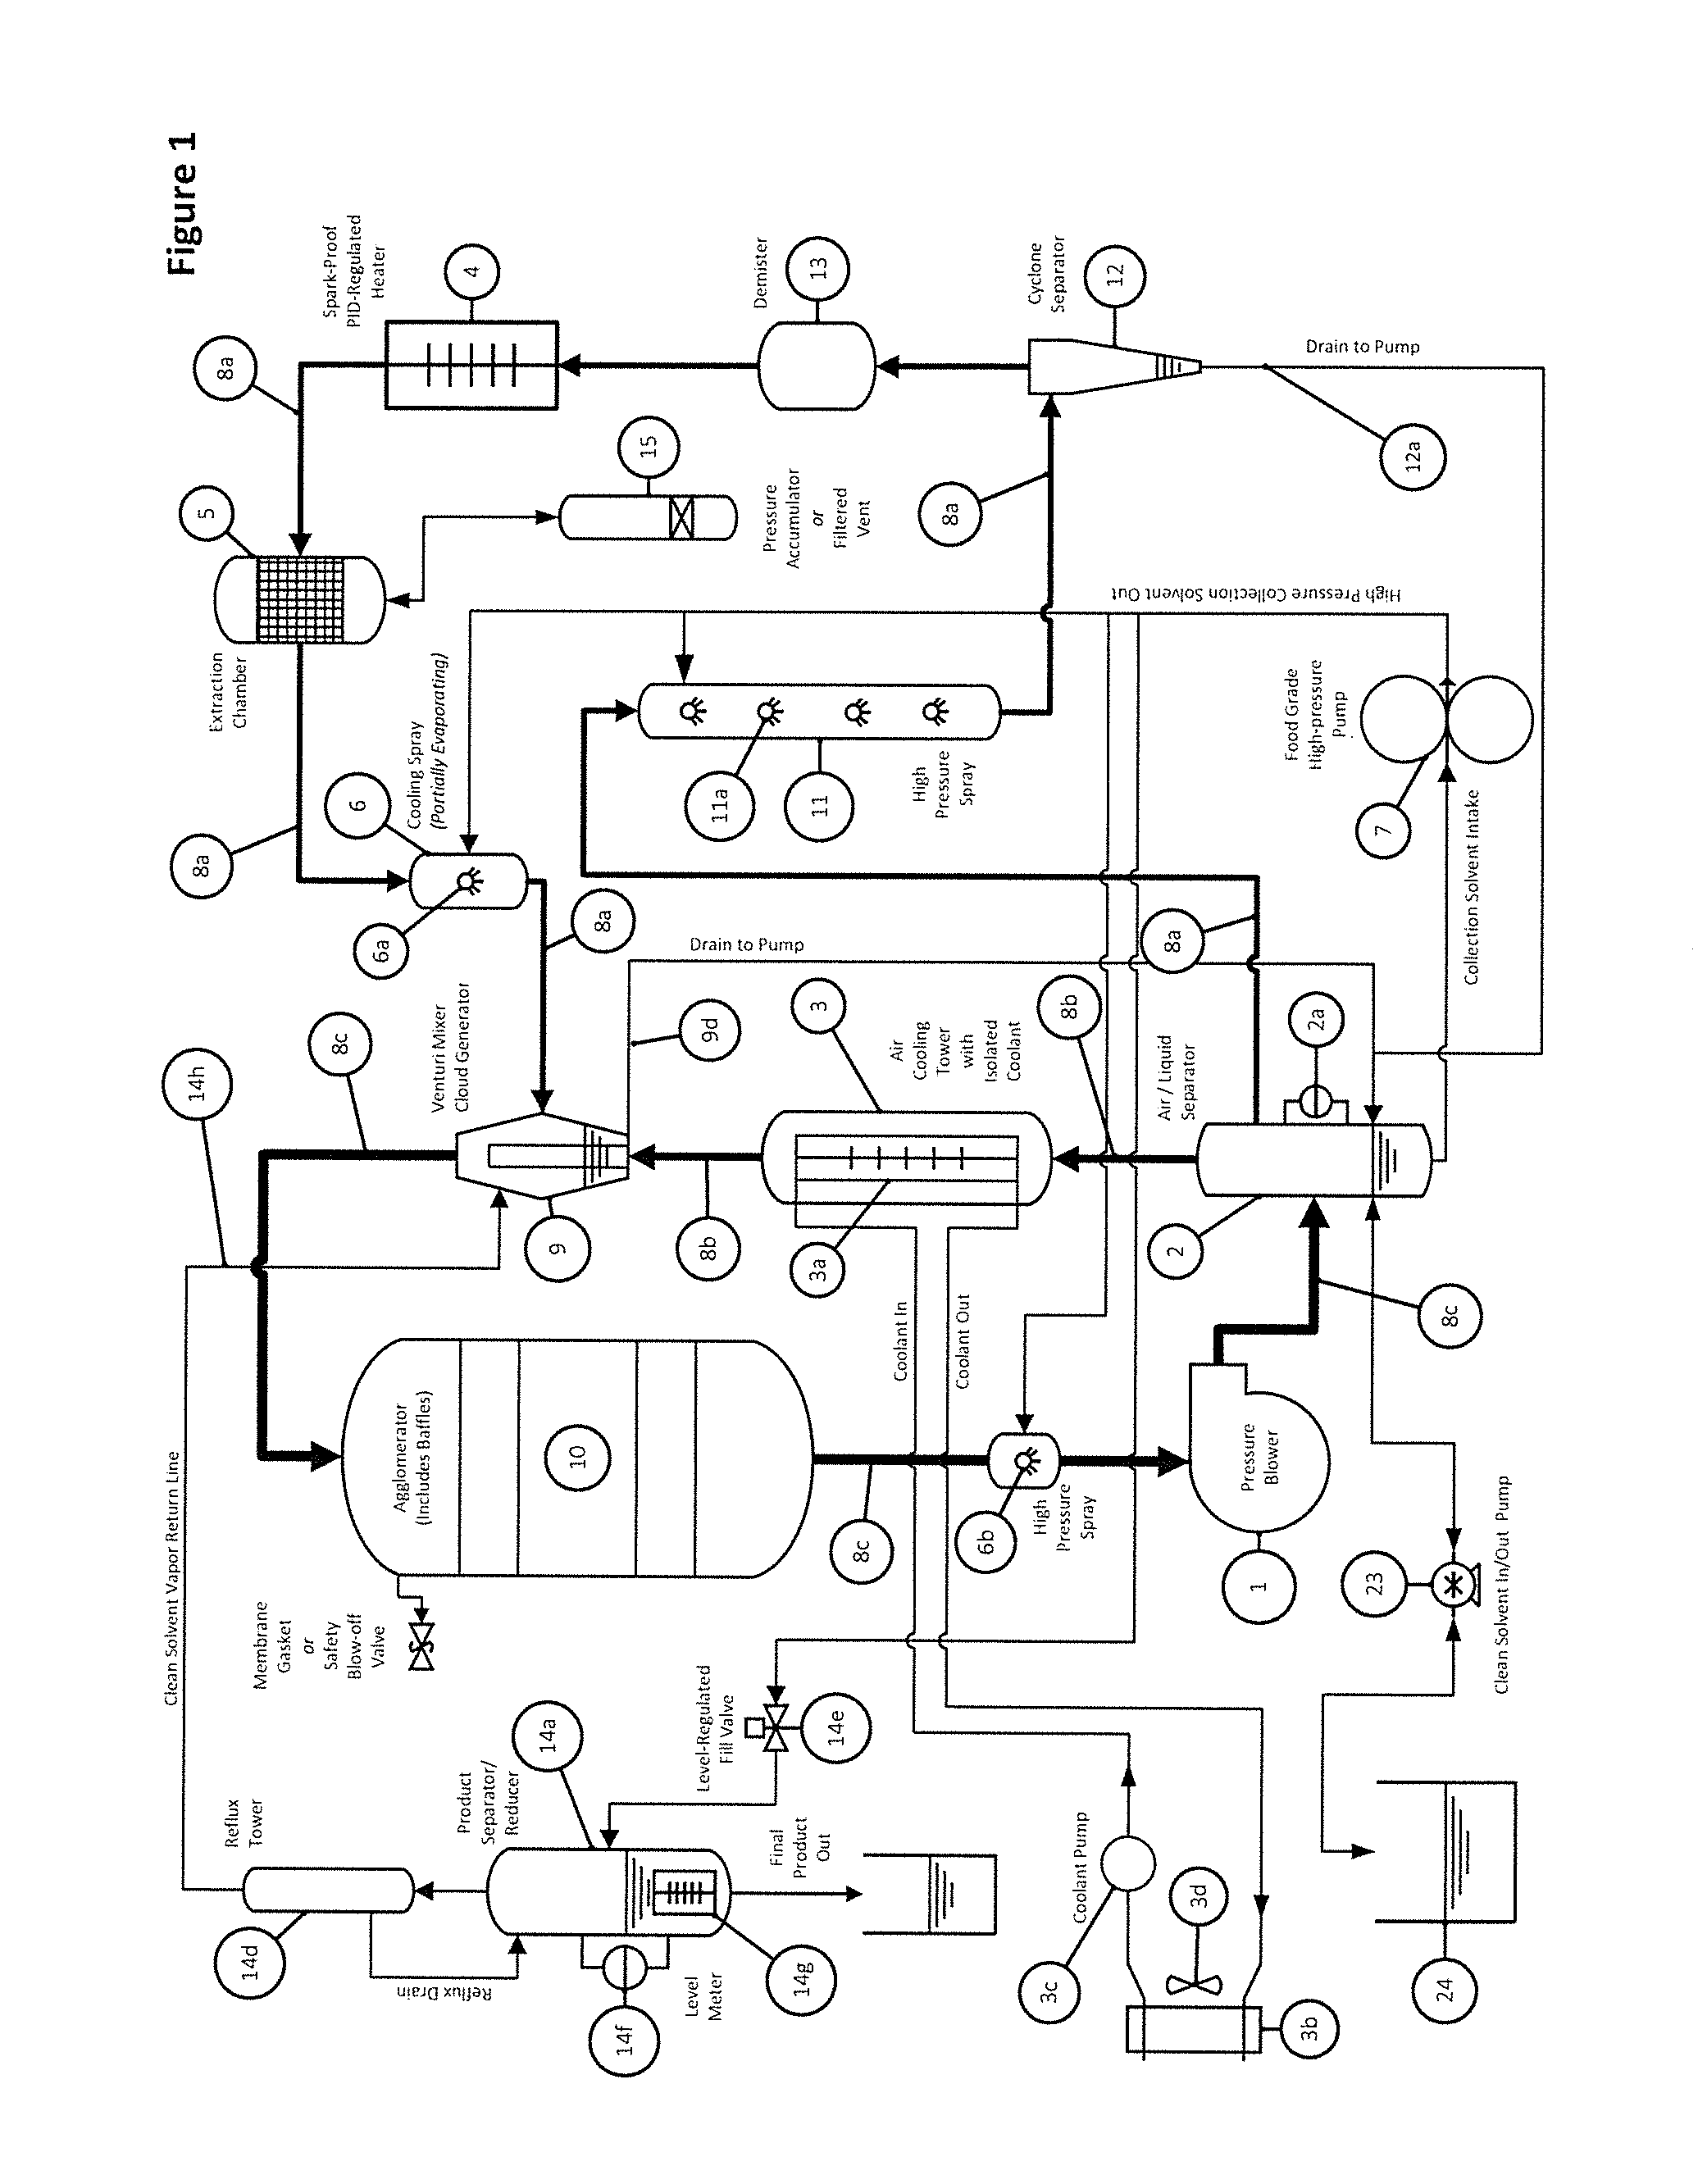 Method and apparatus for extracting botanical oils